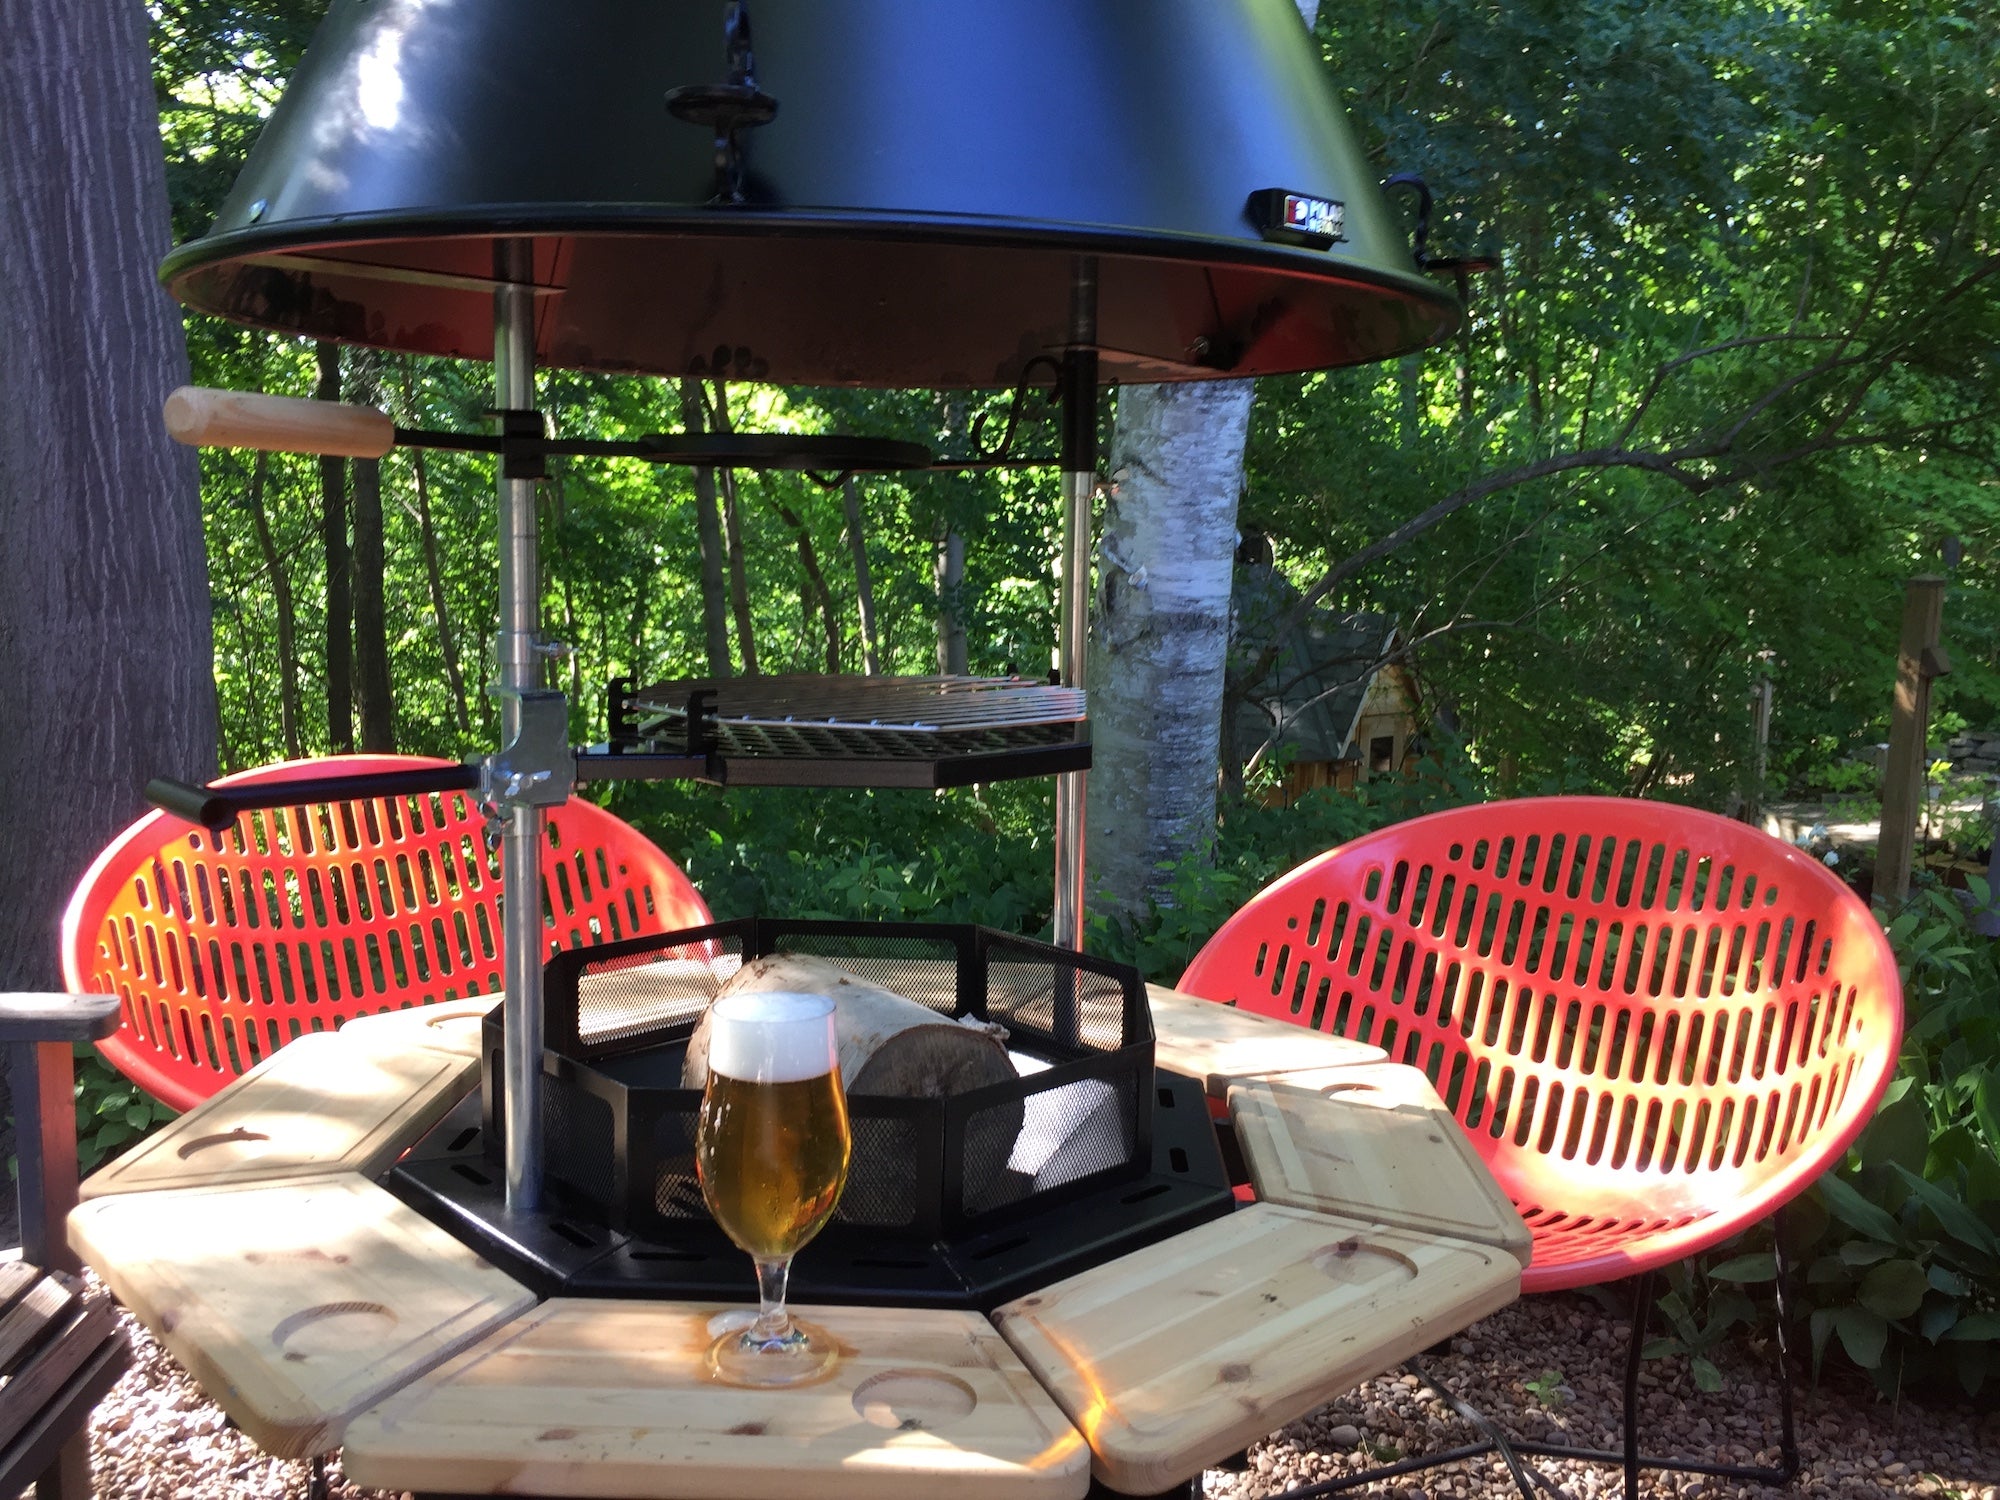  A tall glass of beer sits infront of an S8 Kota Grill in a backyard with bright orange chairs in the background.      